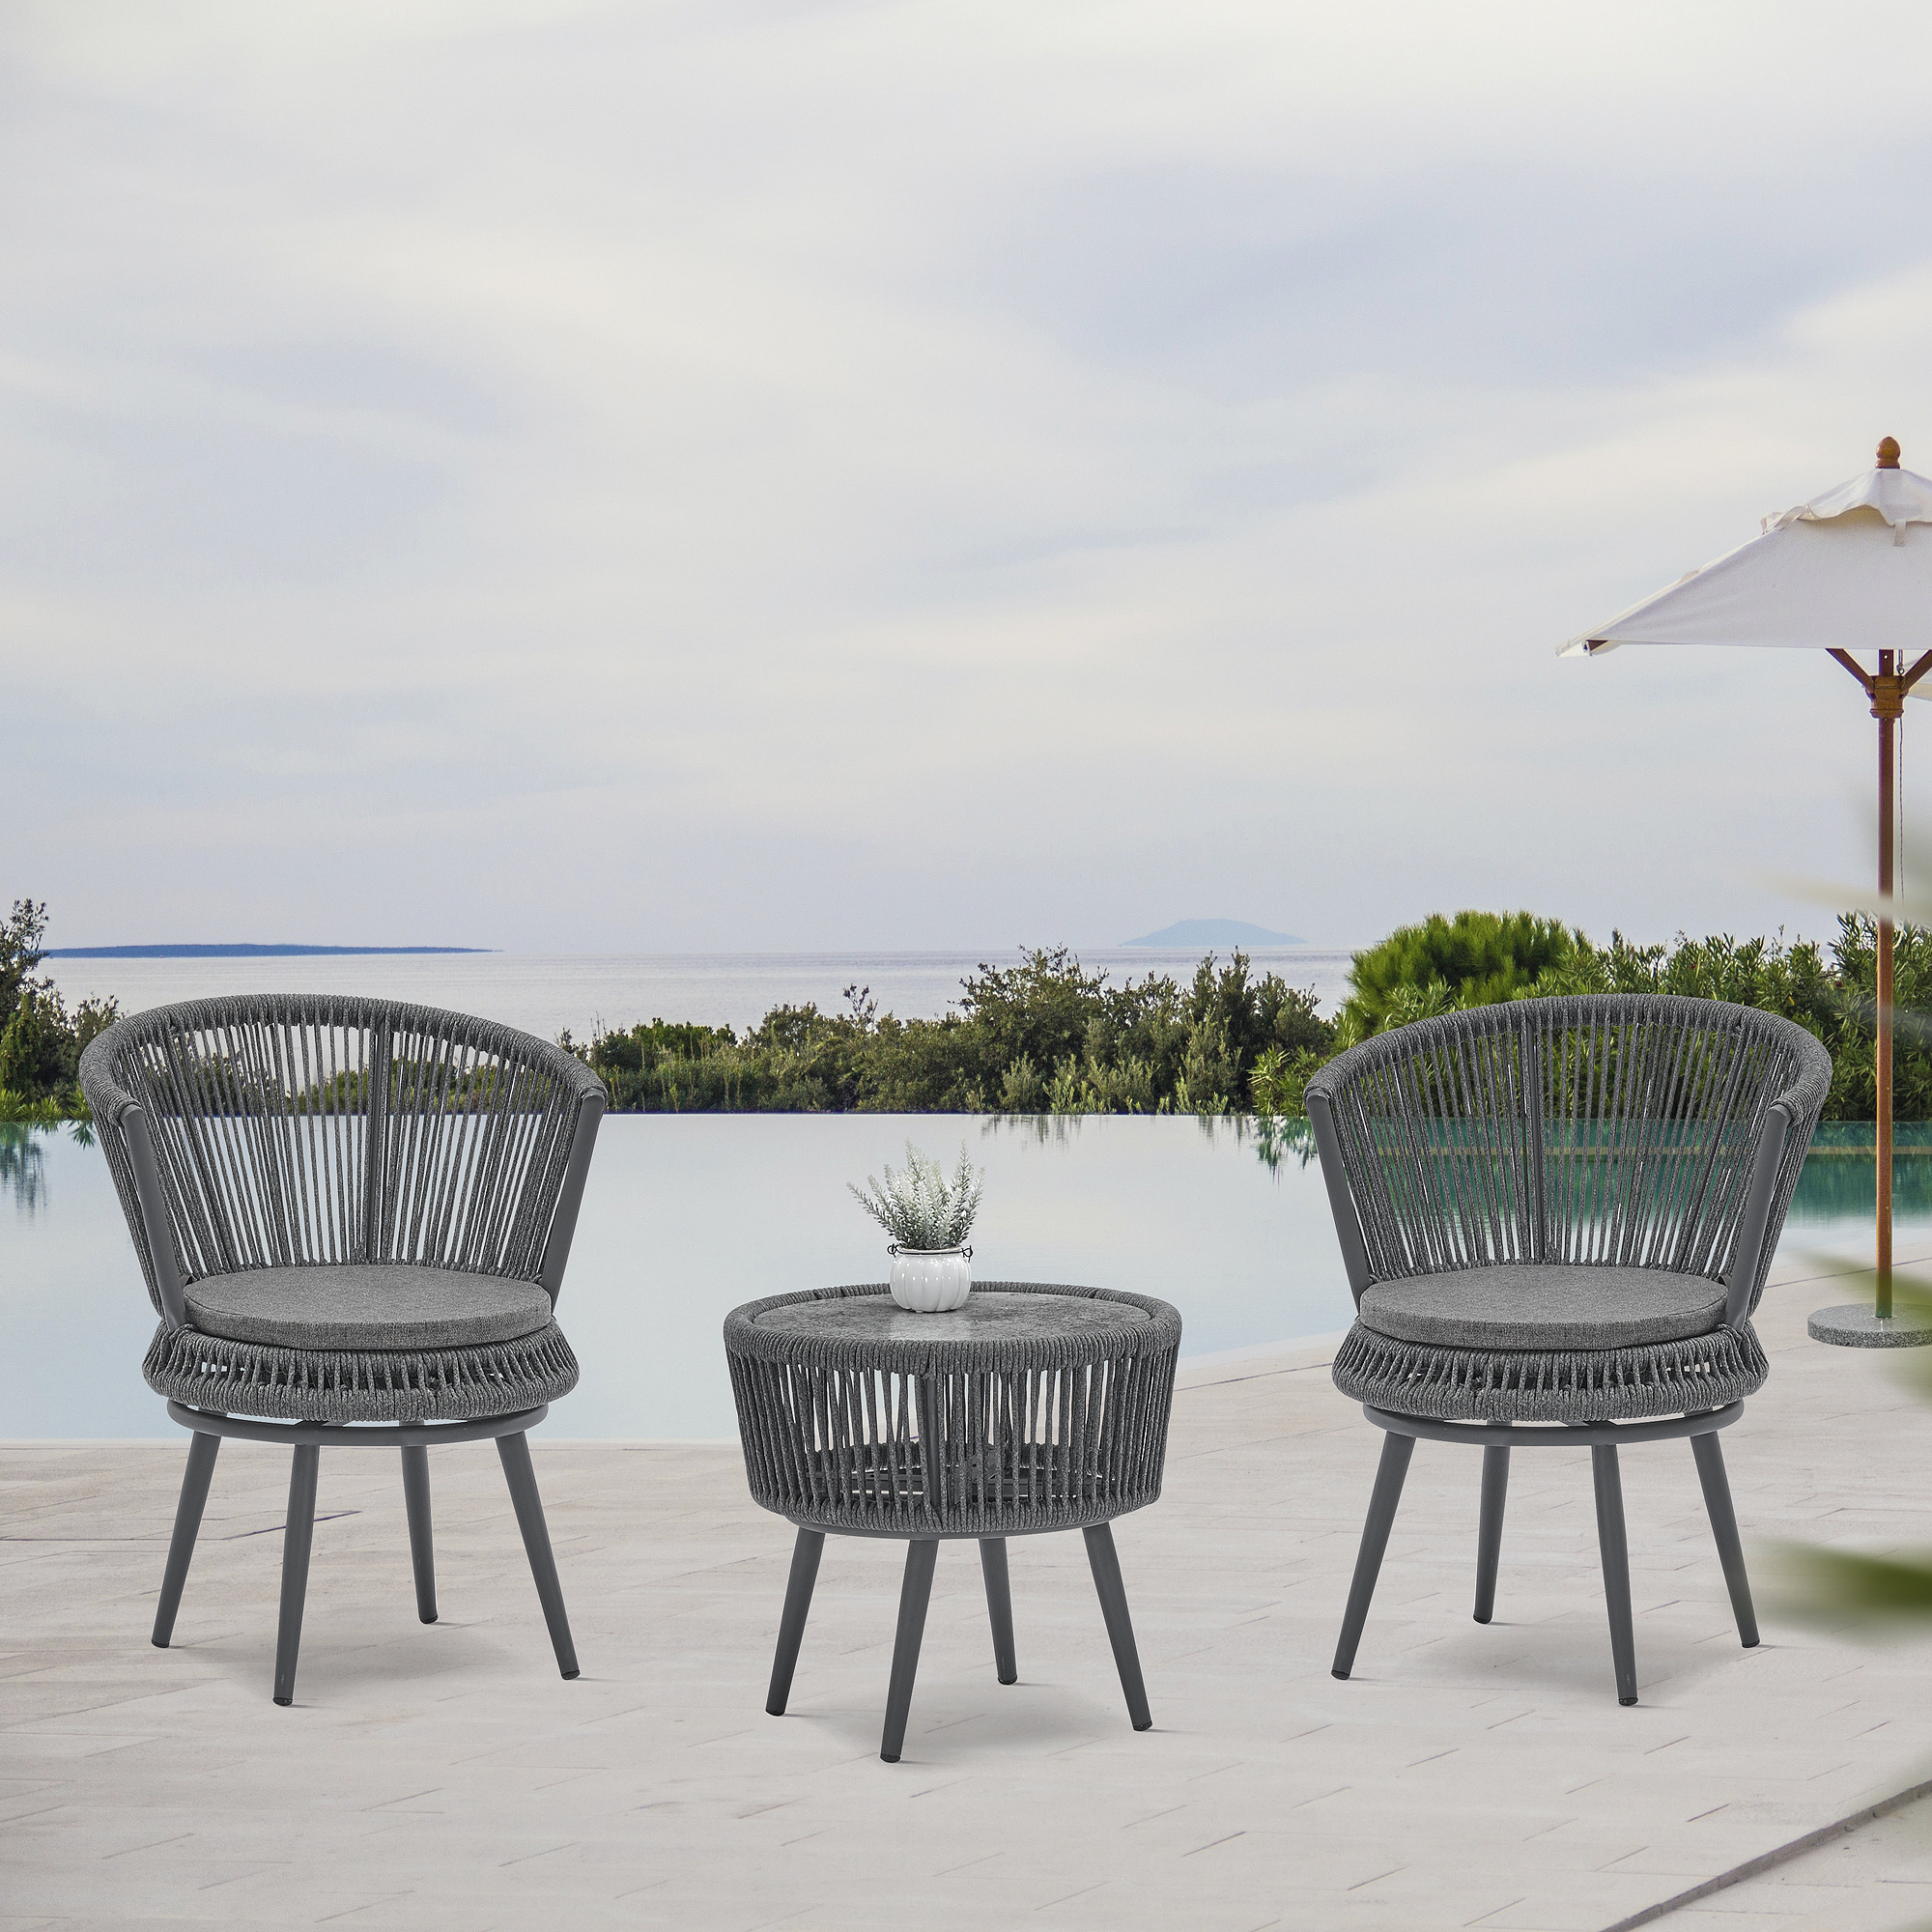 3PCS Outdoor Garden Rattan Chairs with Coffee Table, All Weather Outdoor Lounge Chair Chat Conversation Set for Garden, Backyard, Pool, Balcony - Dark Gray - image 2 of 8